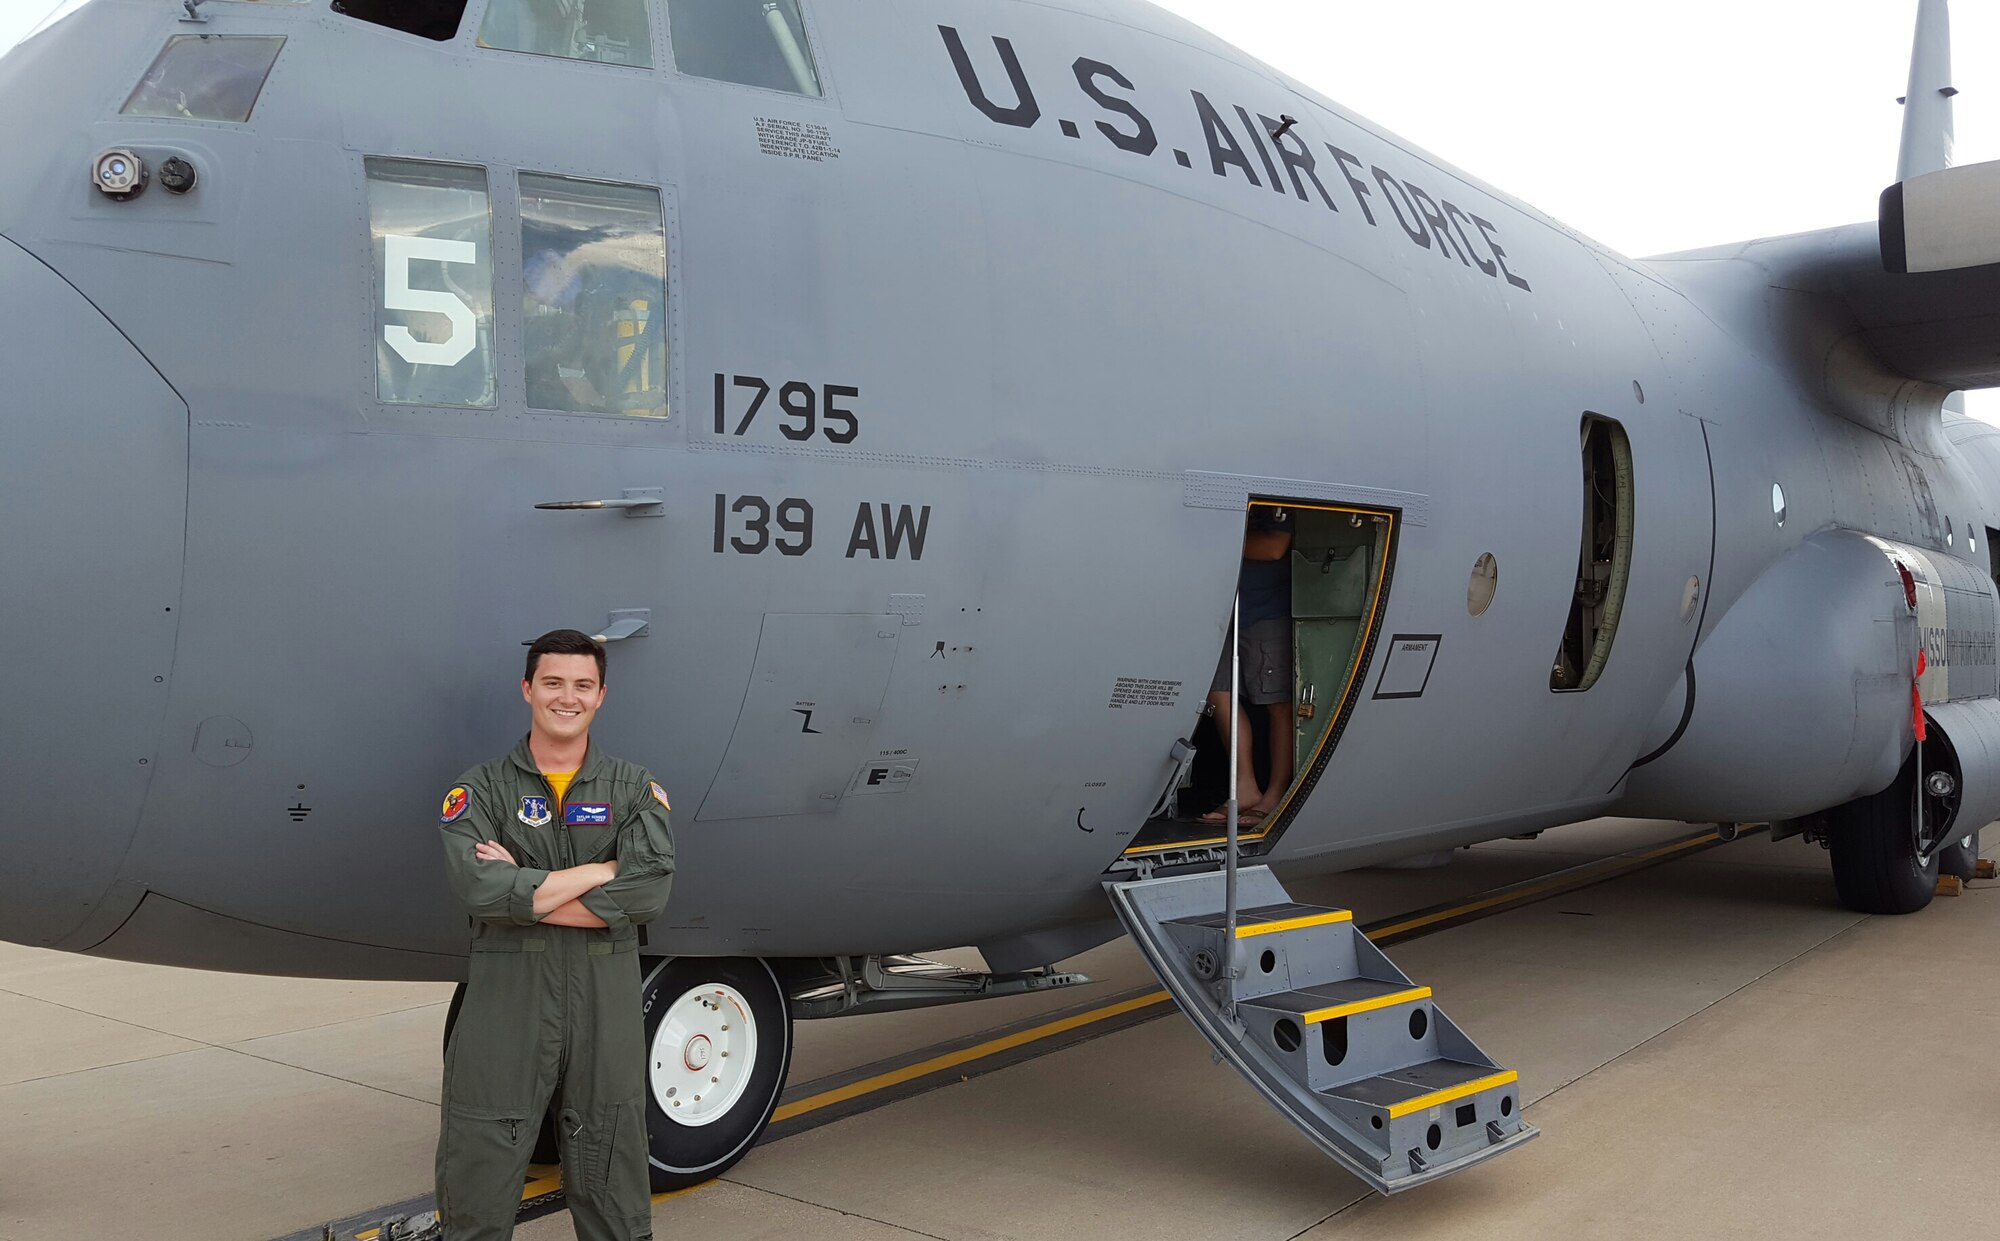 U.S. Air Force Staff Sgt. Taylor Schoen, a flight engineer instructor assigned to the 180th Airlift Squadron, Missouri Air National Guard, poses for a photo at Rosecrans Air National Guard Base, St. Joseph, Mo., Aug. 26, 2016. Schoen recently completed Flight Engineer Instructor School as one of the youngest ever to graduate. (U.S. Air National Guard photo by Tech. Sgt. Theo Ramsey)